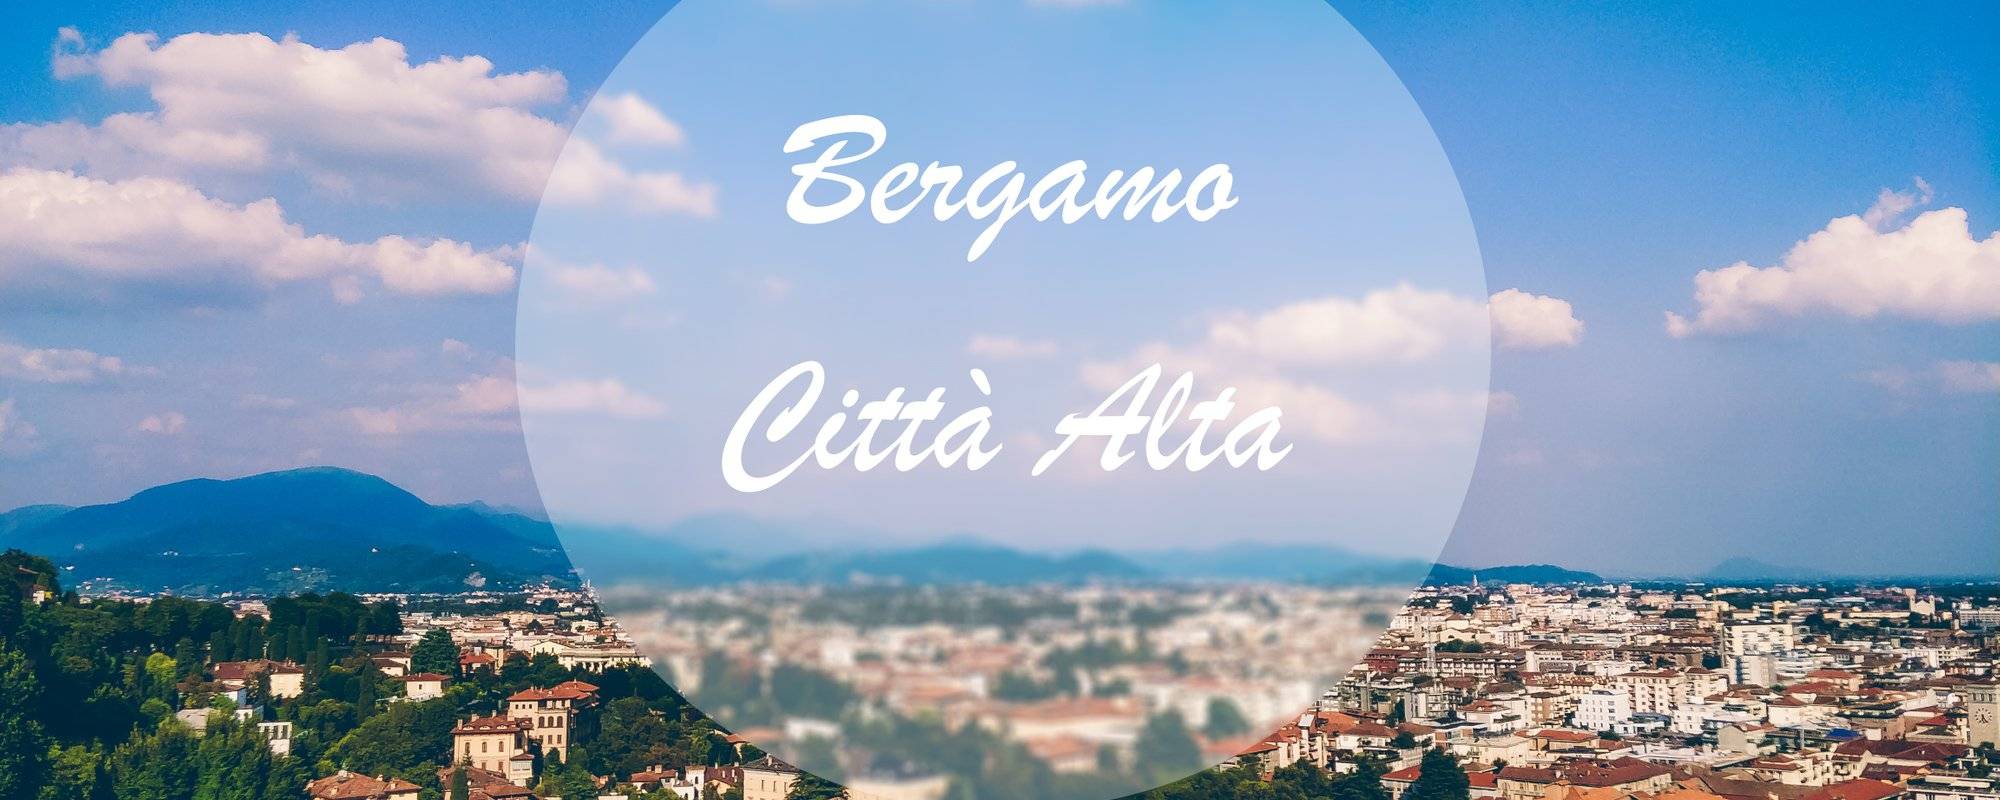 Bergamo - Città Alta. Place which you HAVE TO see